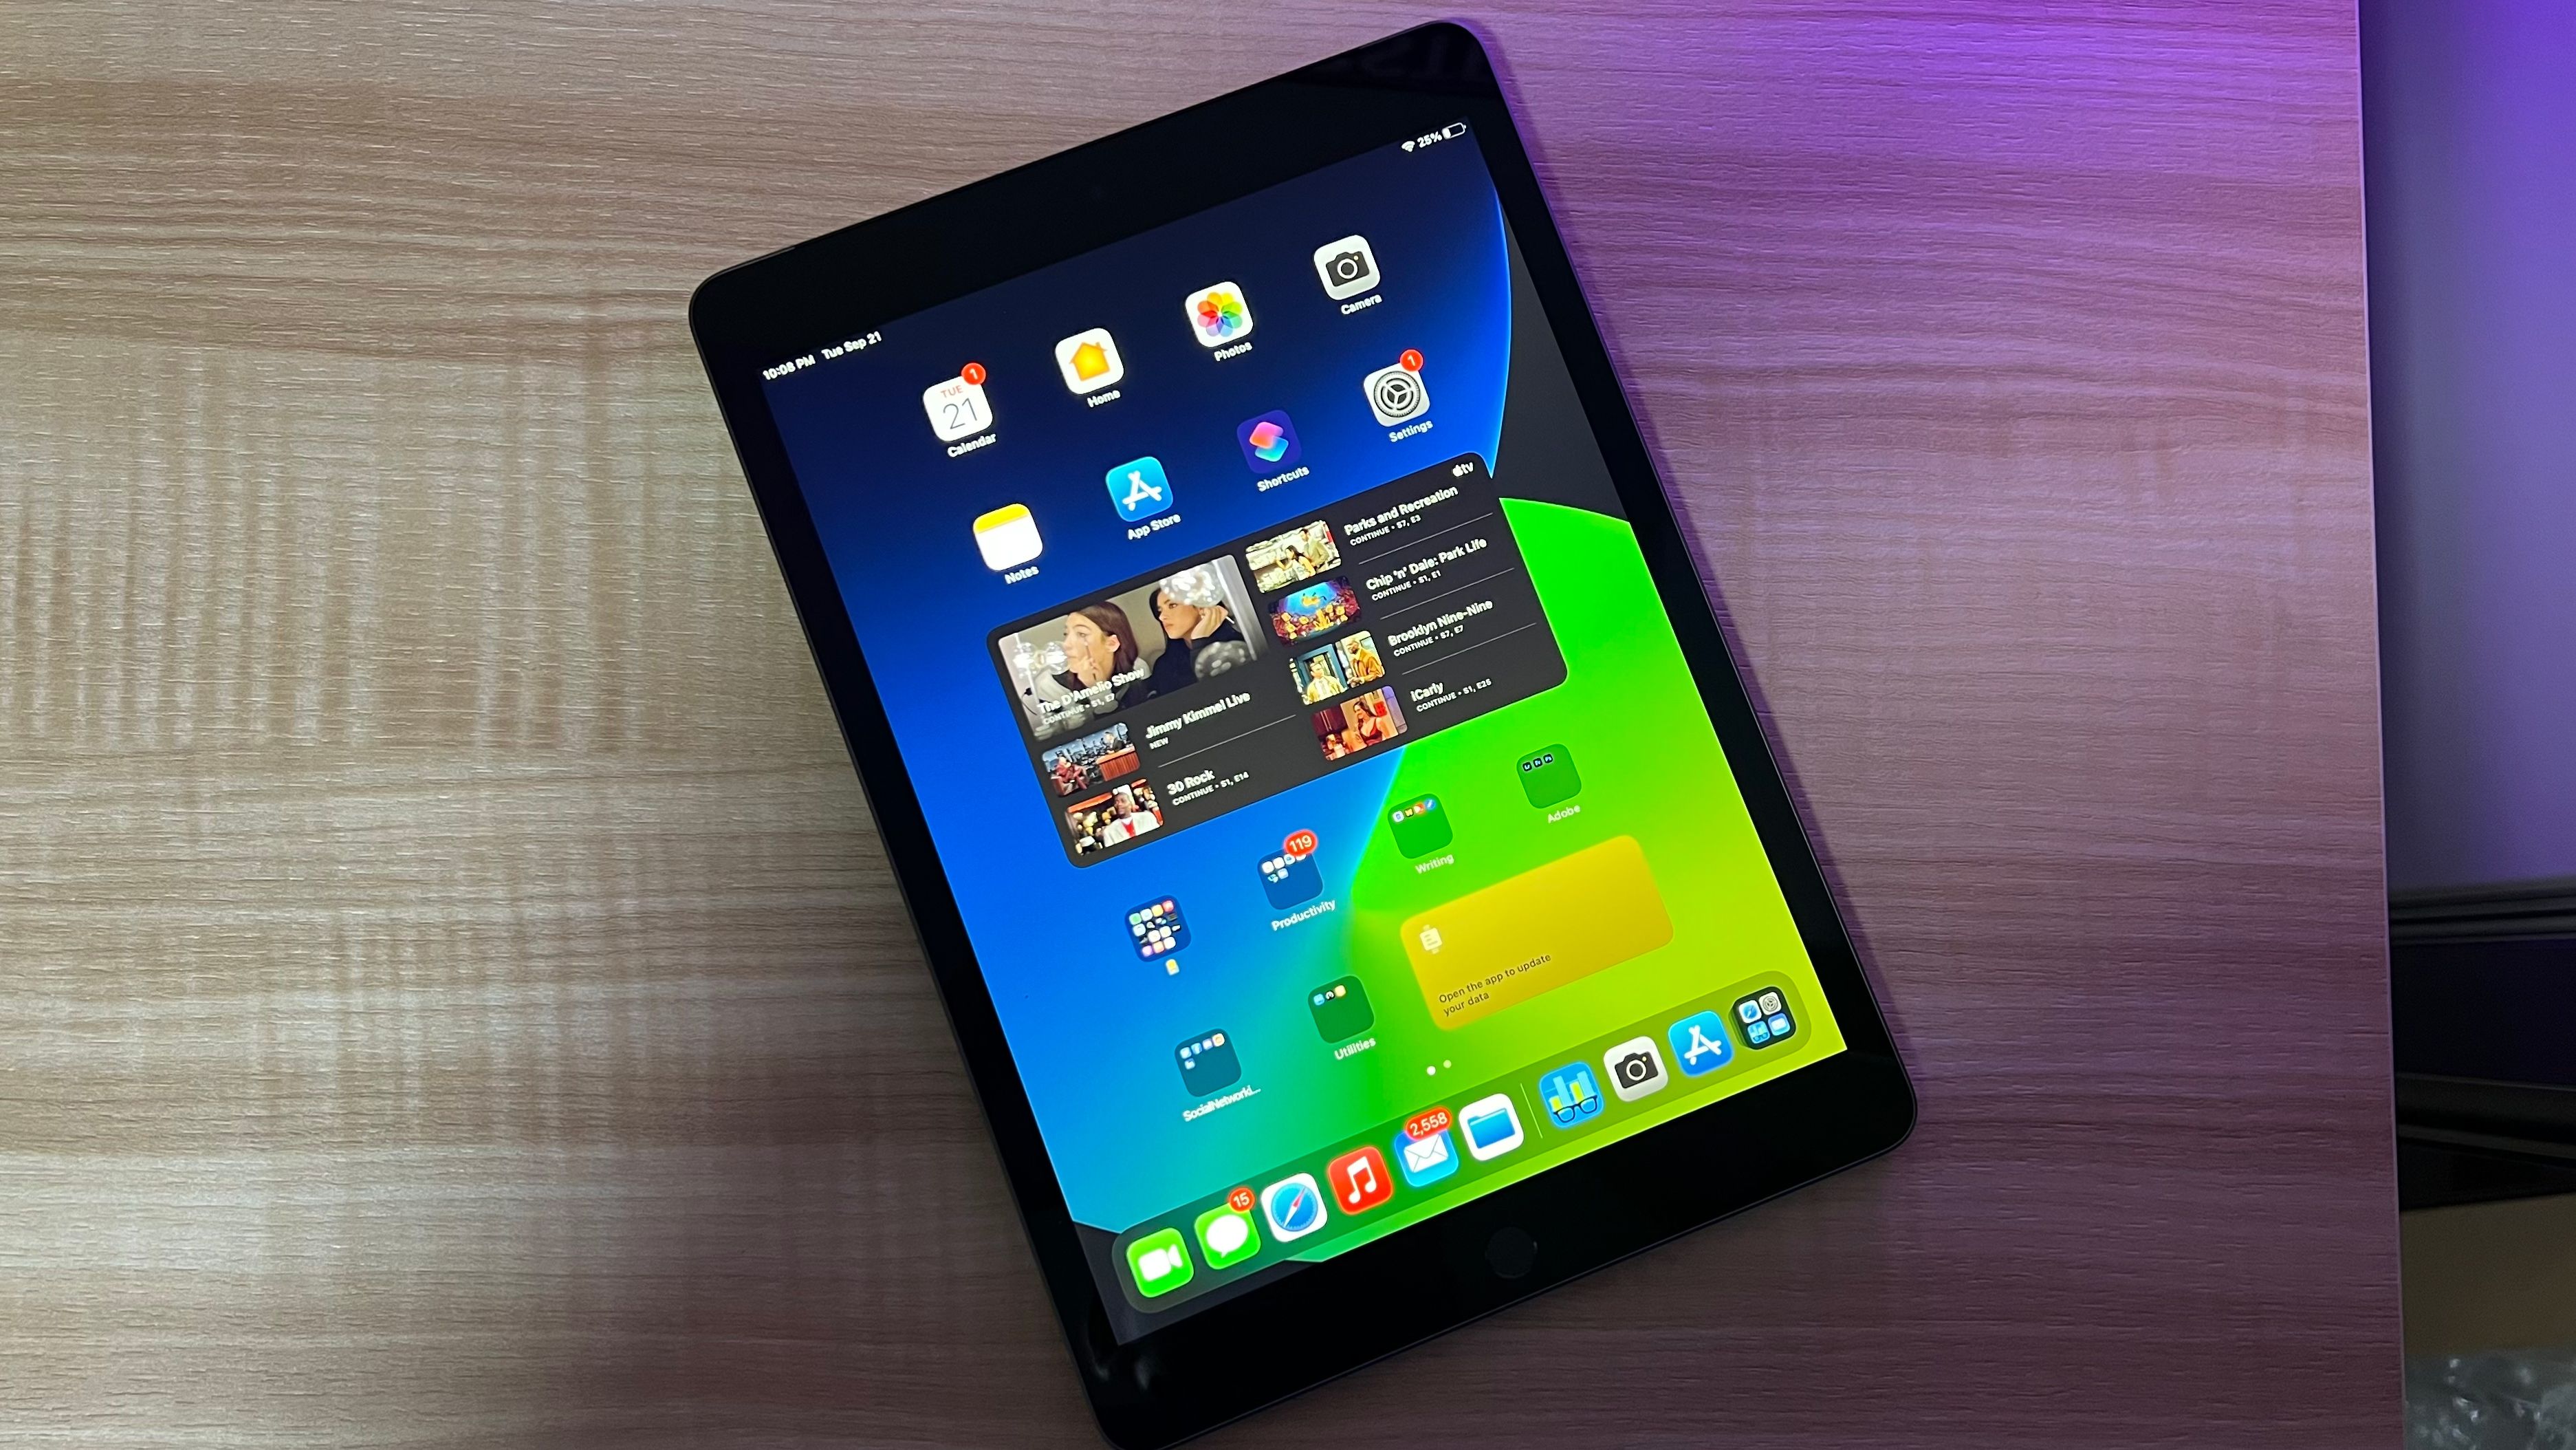 11-Inch iPad Pro Price Guide. Deals, Discounts on 2020 Tablets